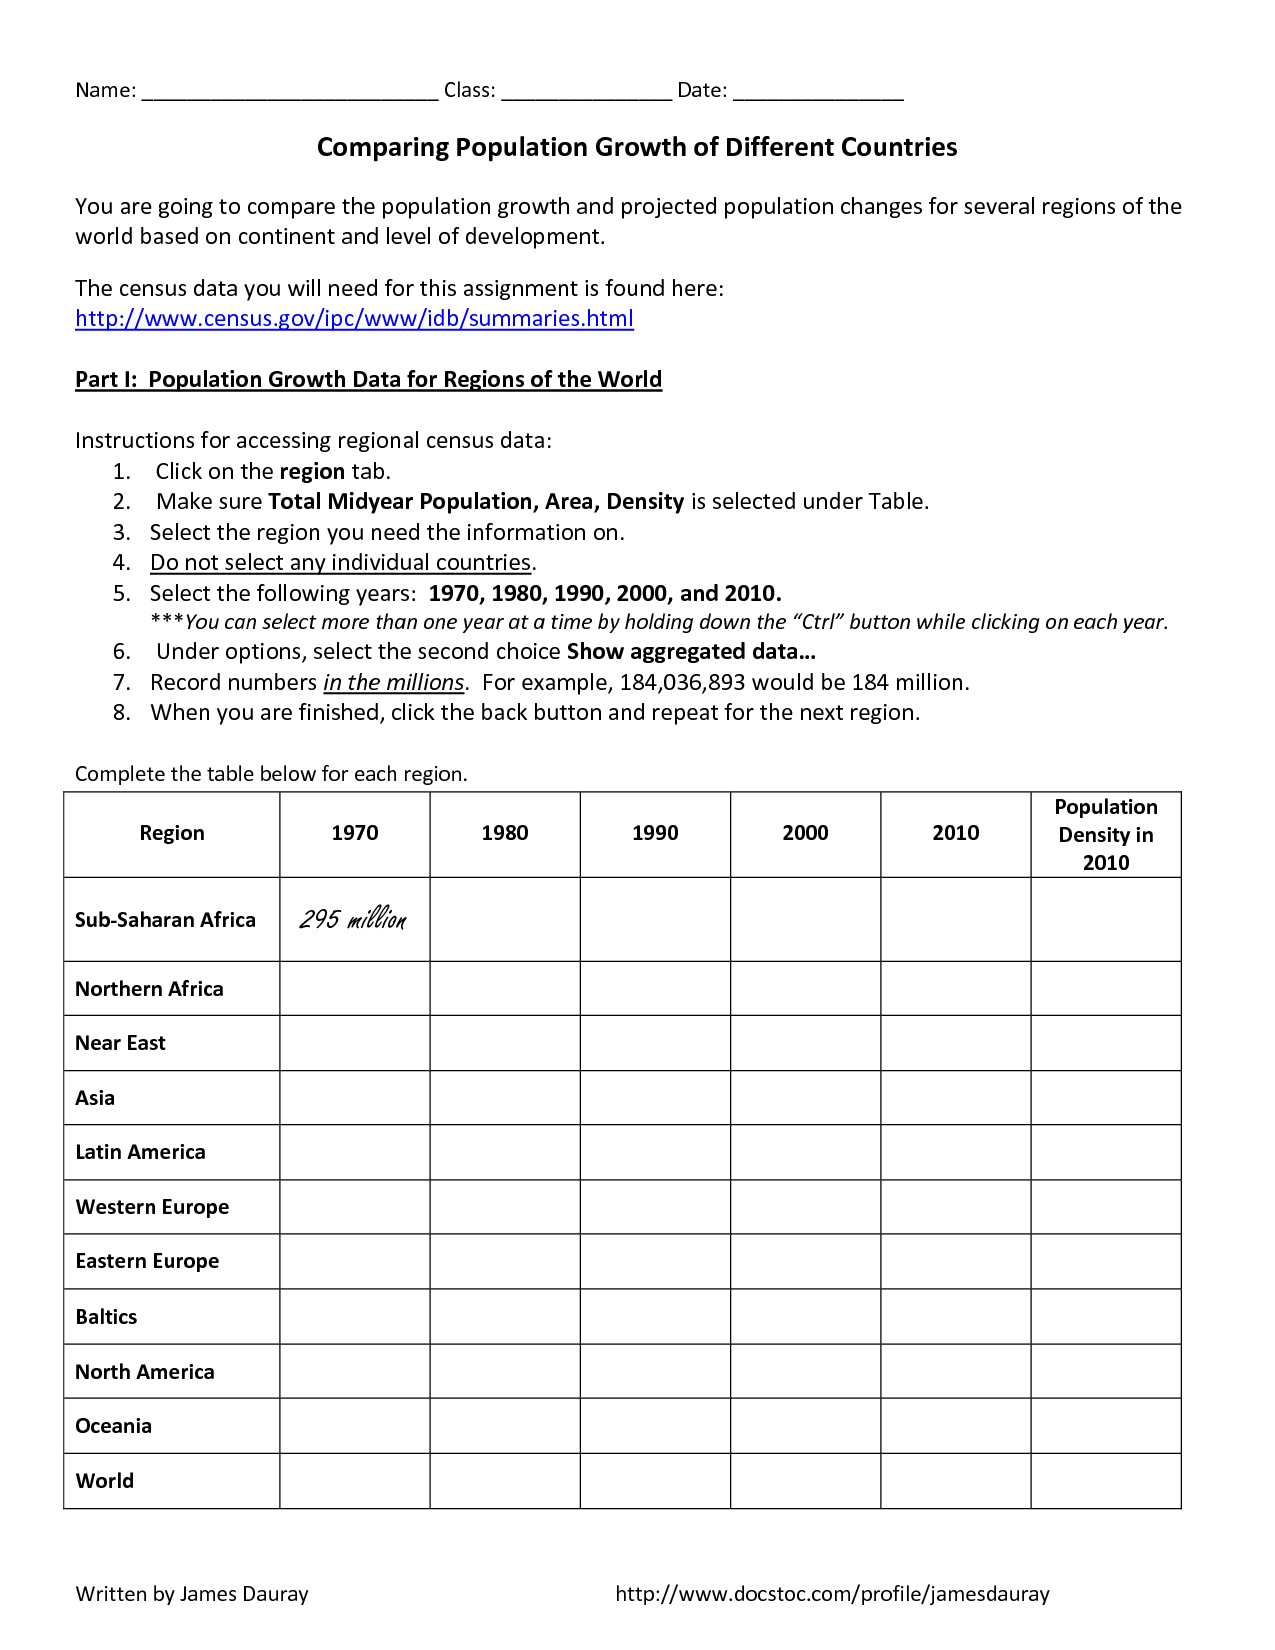 15-best-images-of-a-world-famous-table-worksheet-answers-significant-figures-worksheet-and